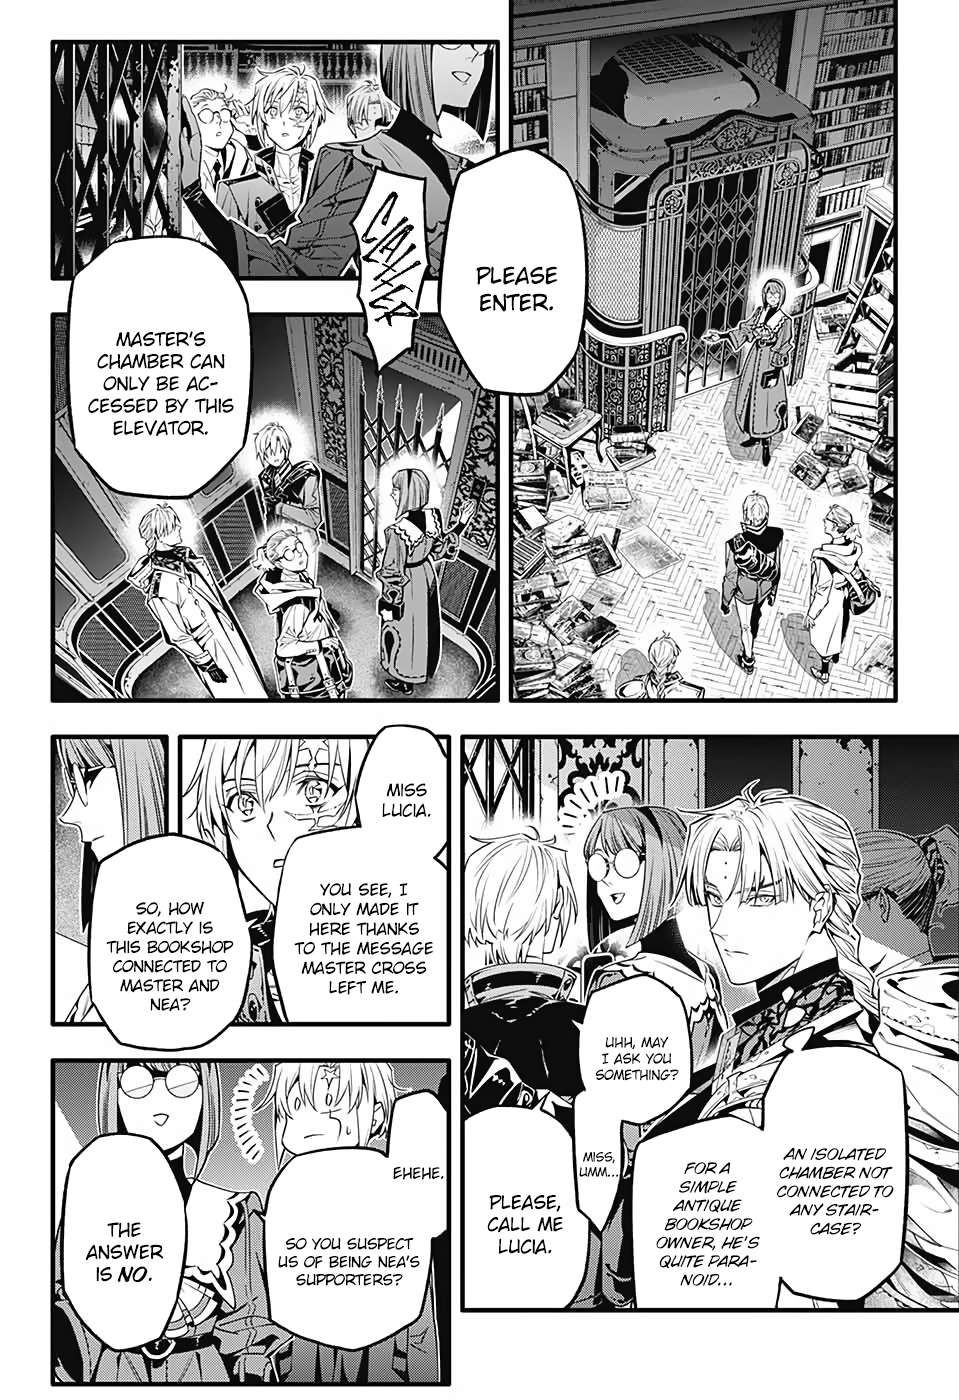 D.Gray-man chapter 251 page 14